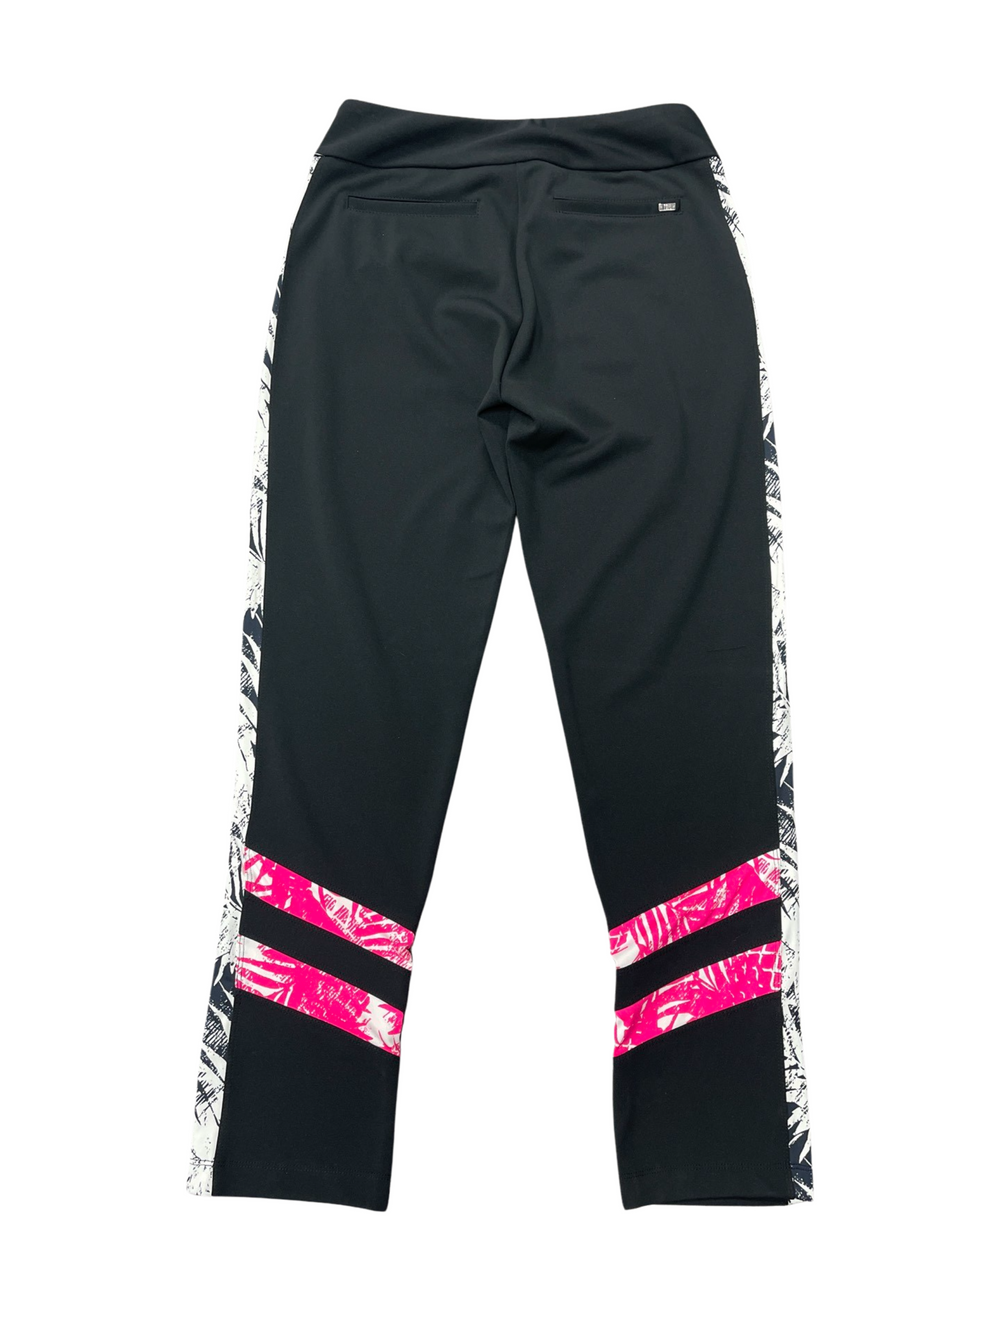 Tail Tropical Ankle Pant - Black/Hot Pink - Size 6 - Skorzie